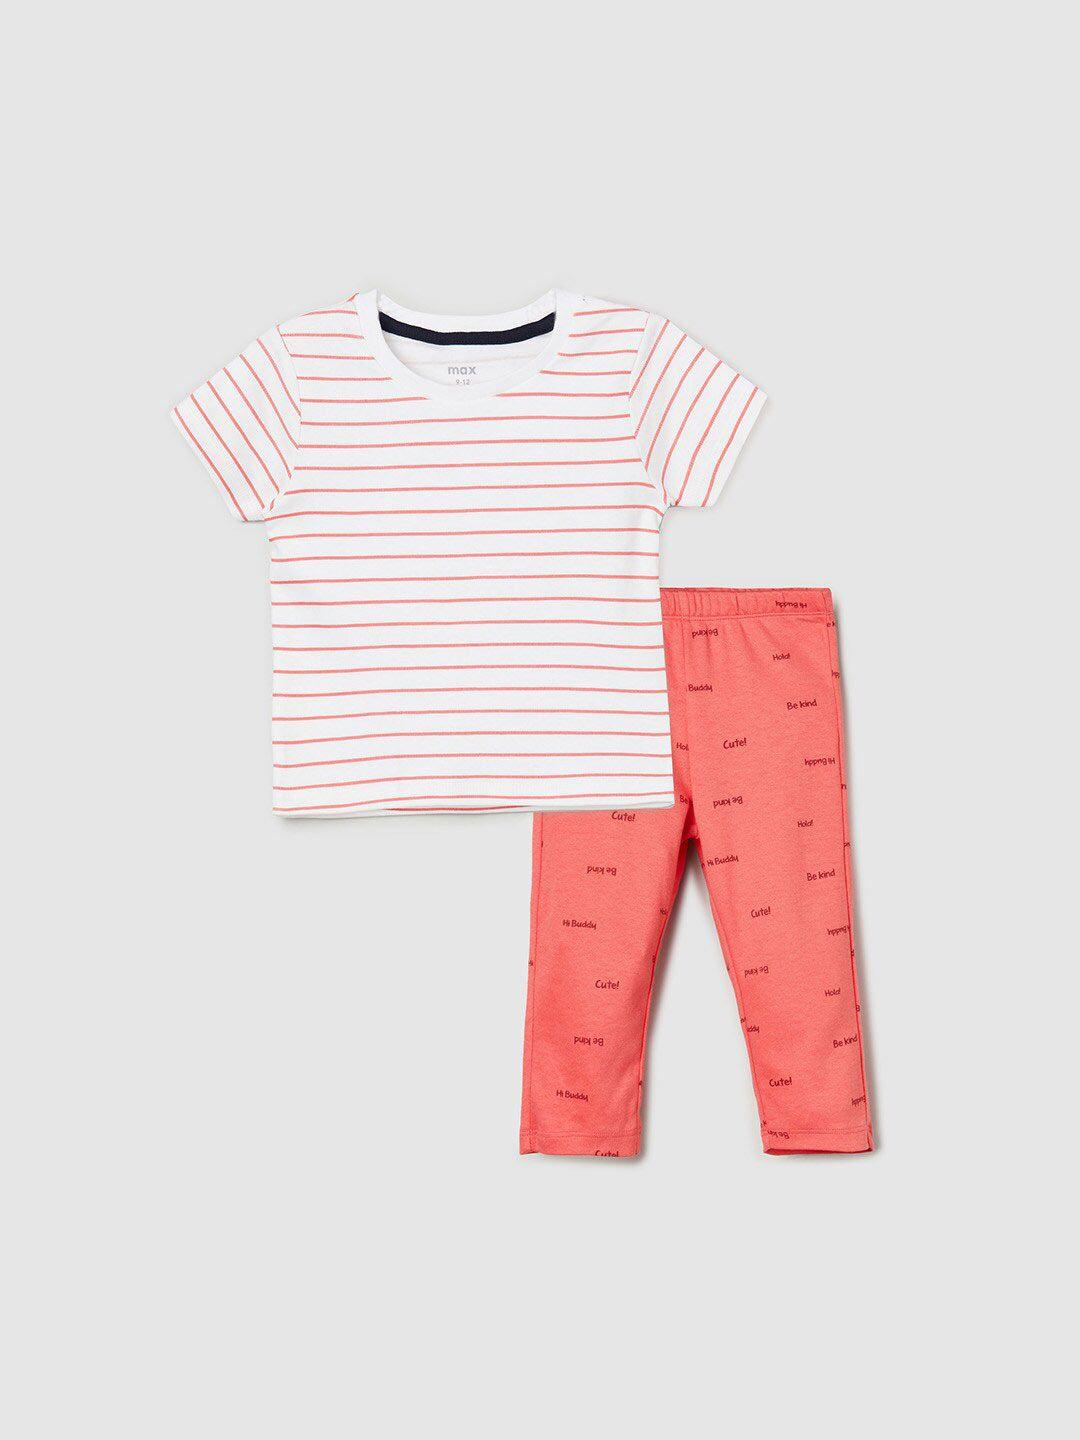 max boys white & coral orange striped & printed pure cotton t-shirt with trousers